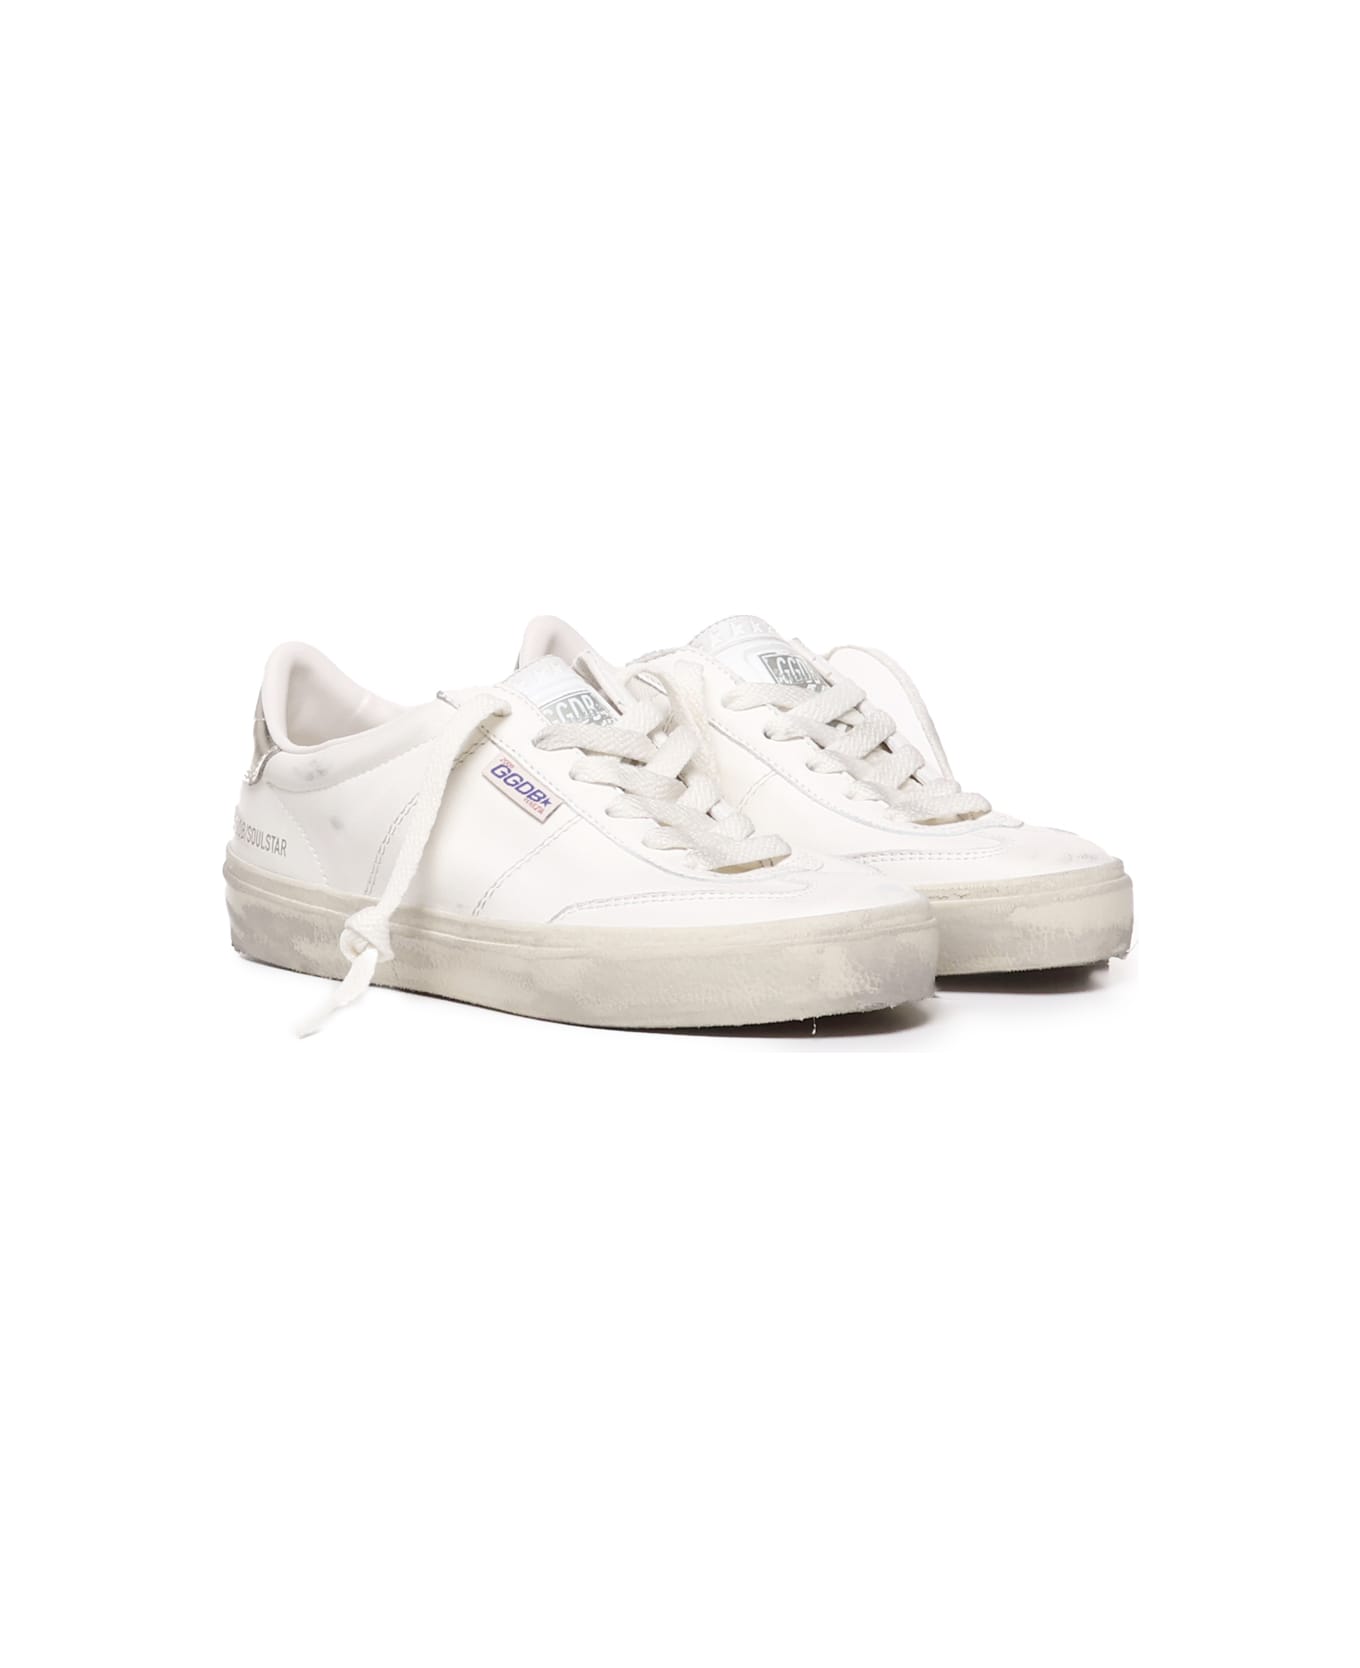 Golden Goose Soul Star Leather Sneakers - WHITE/GOLD スニーカー